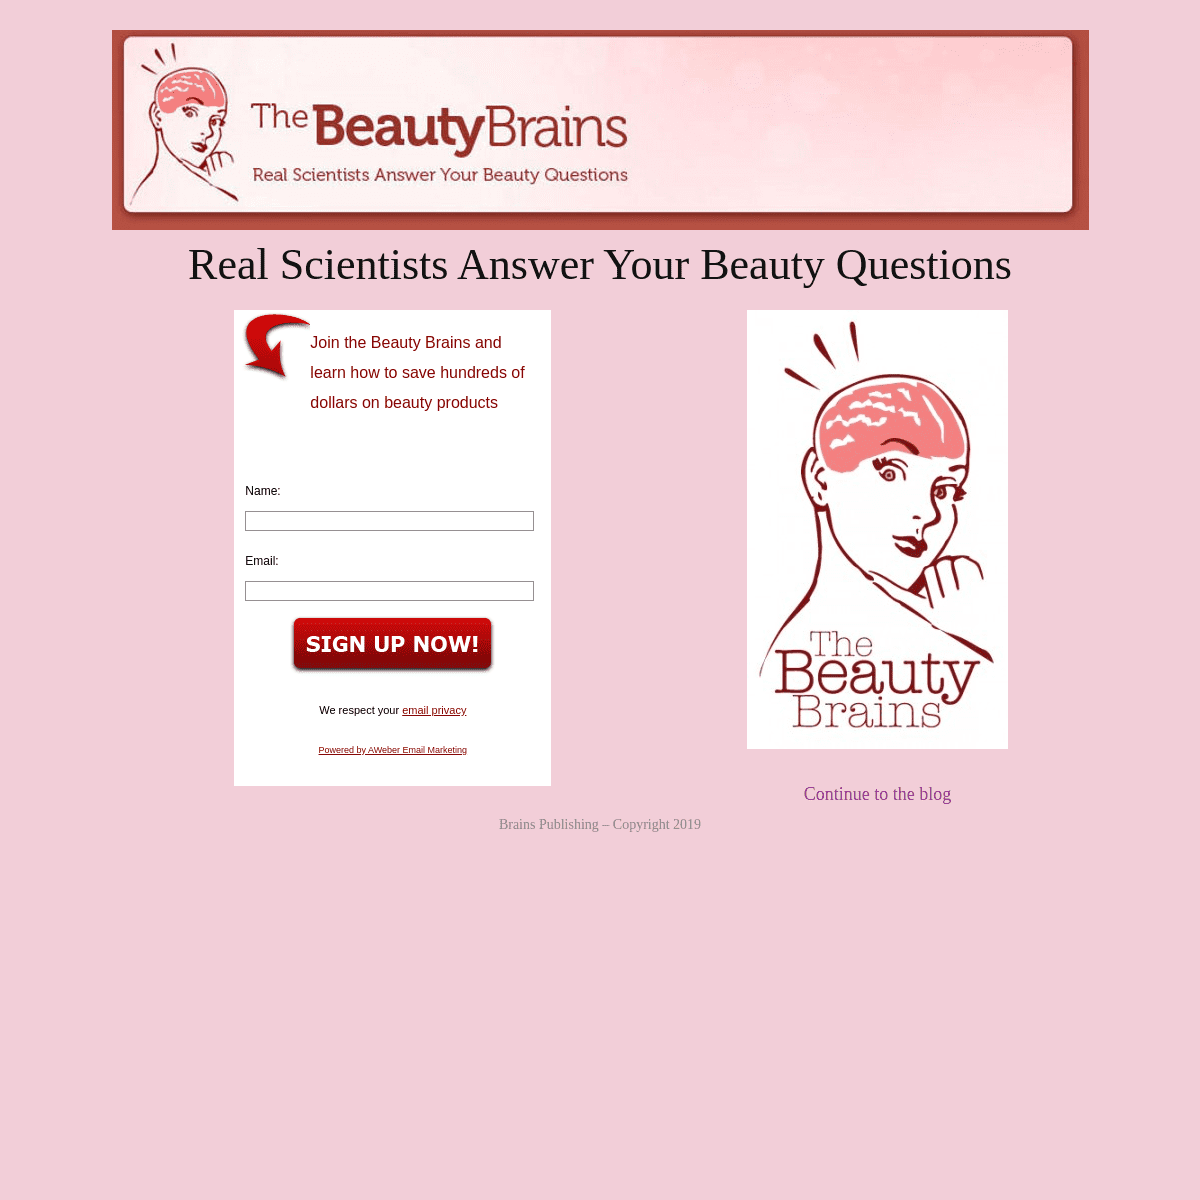 A complete backup of thebeautybrains.com